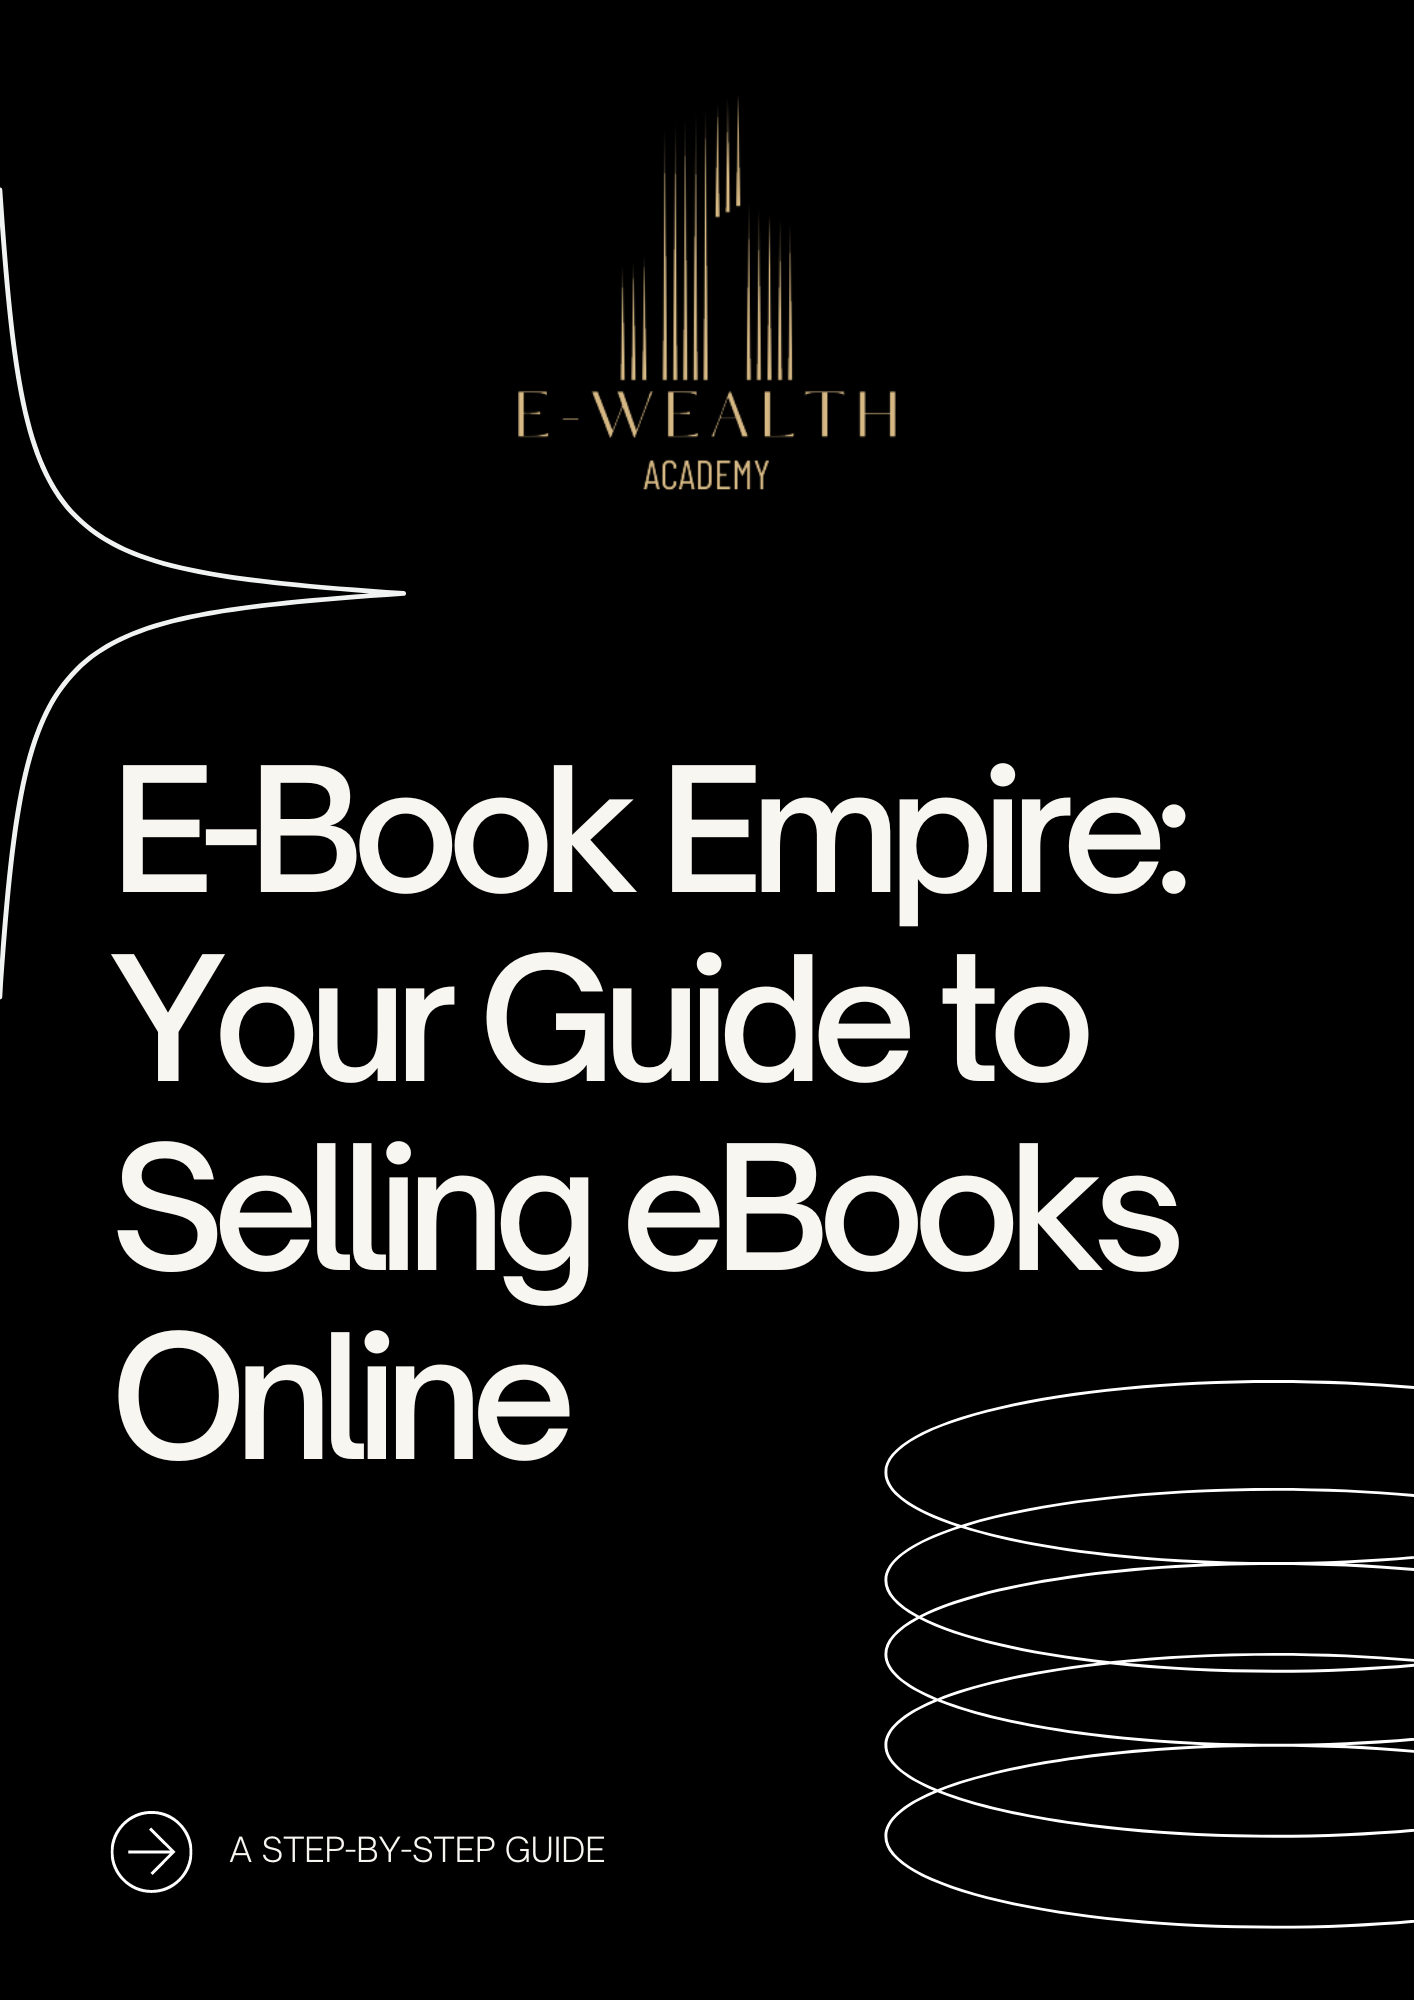 E-Book Empire: Your Guide to Selling eBooks Online